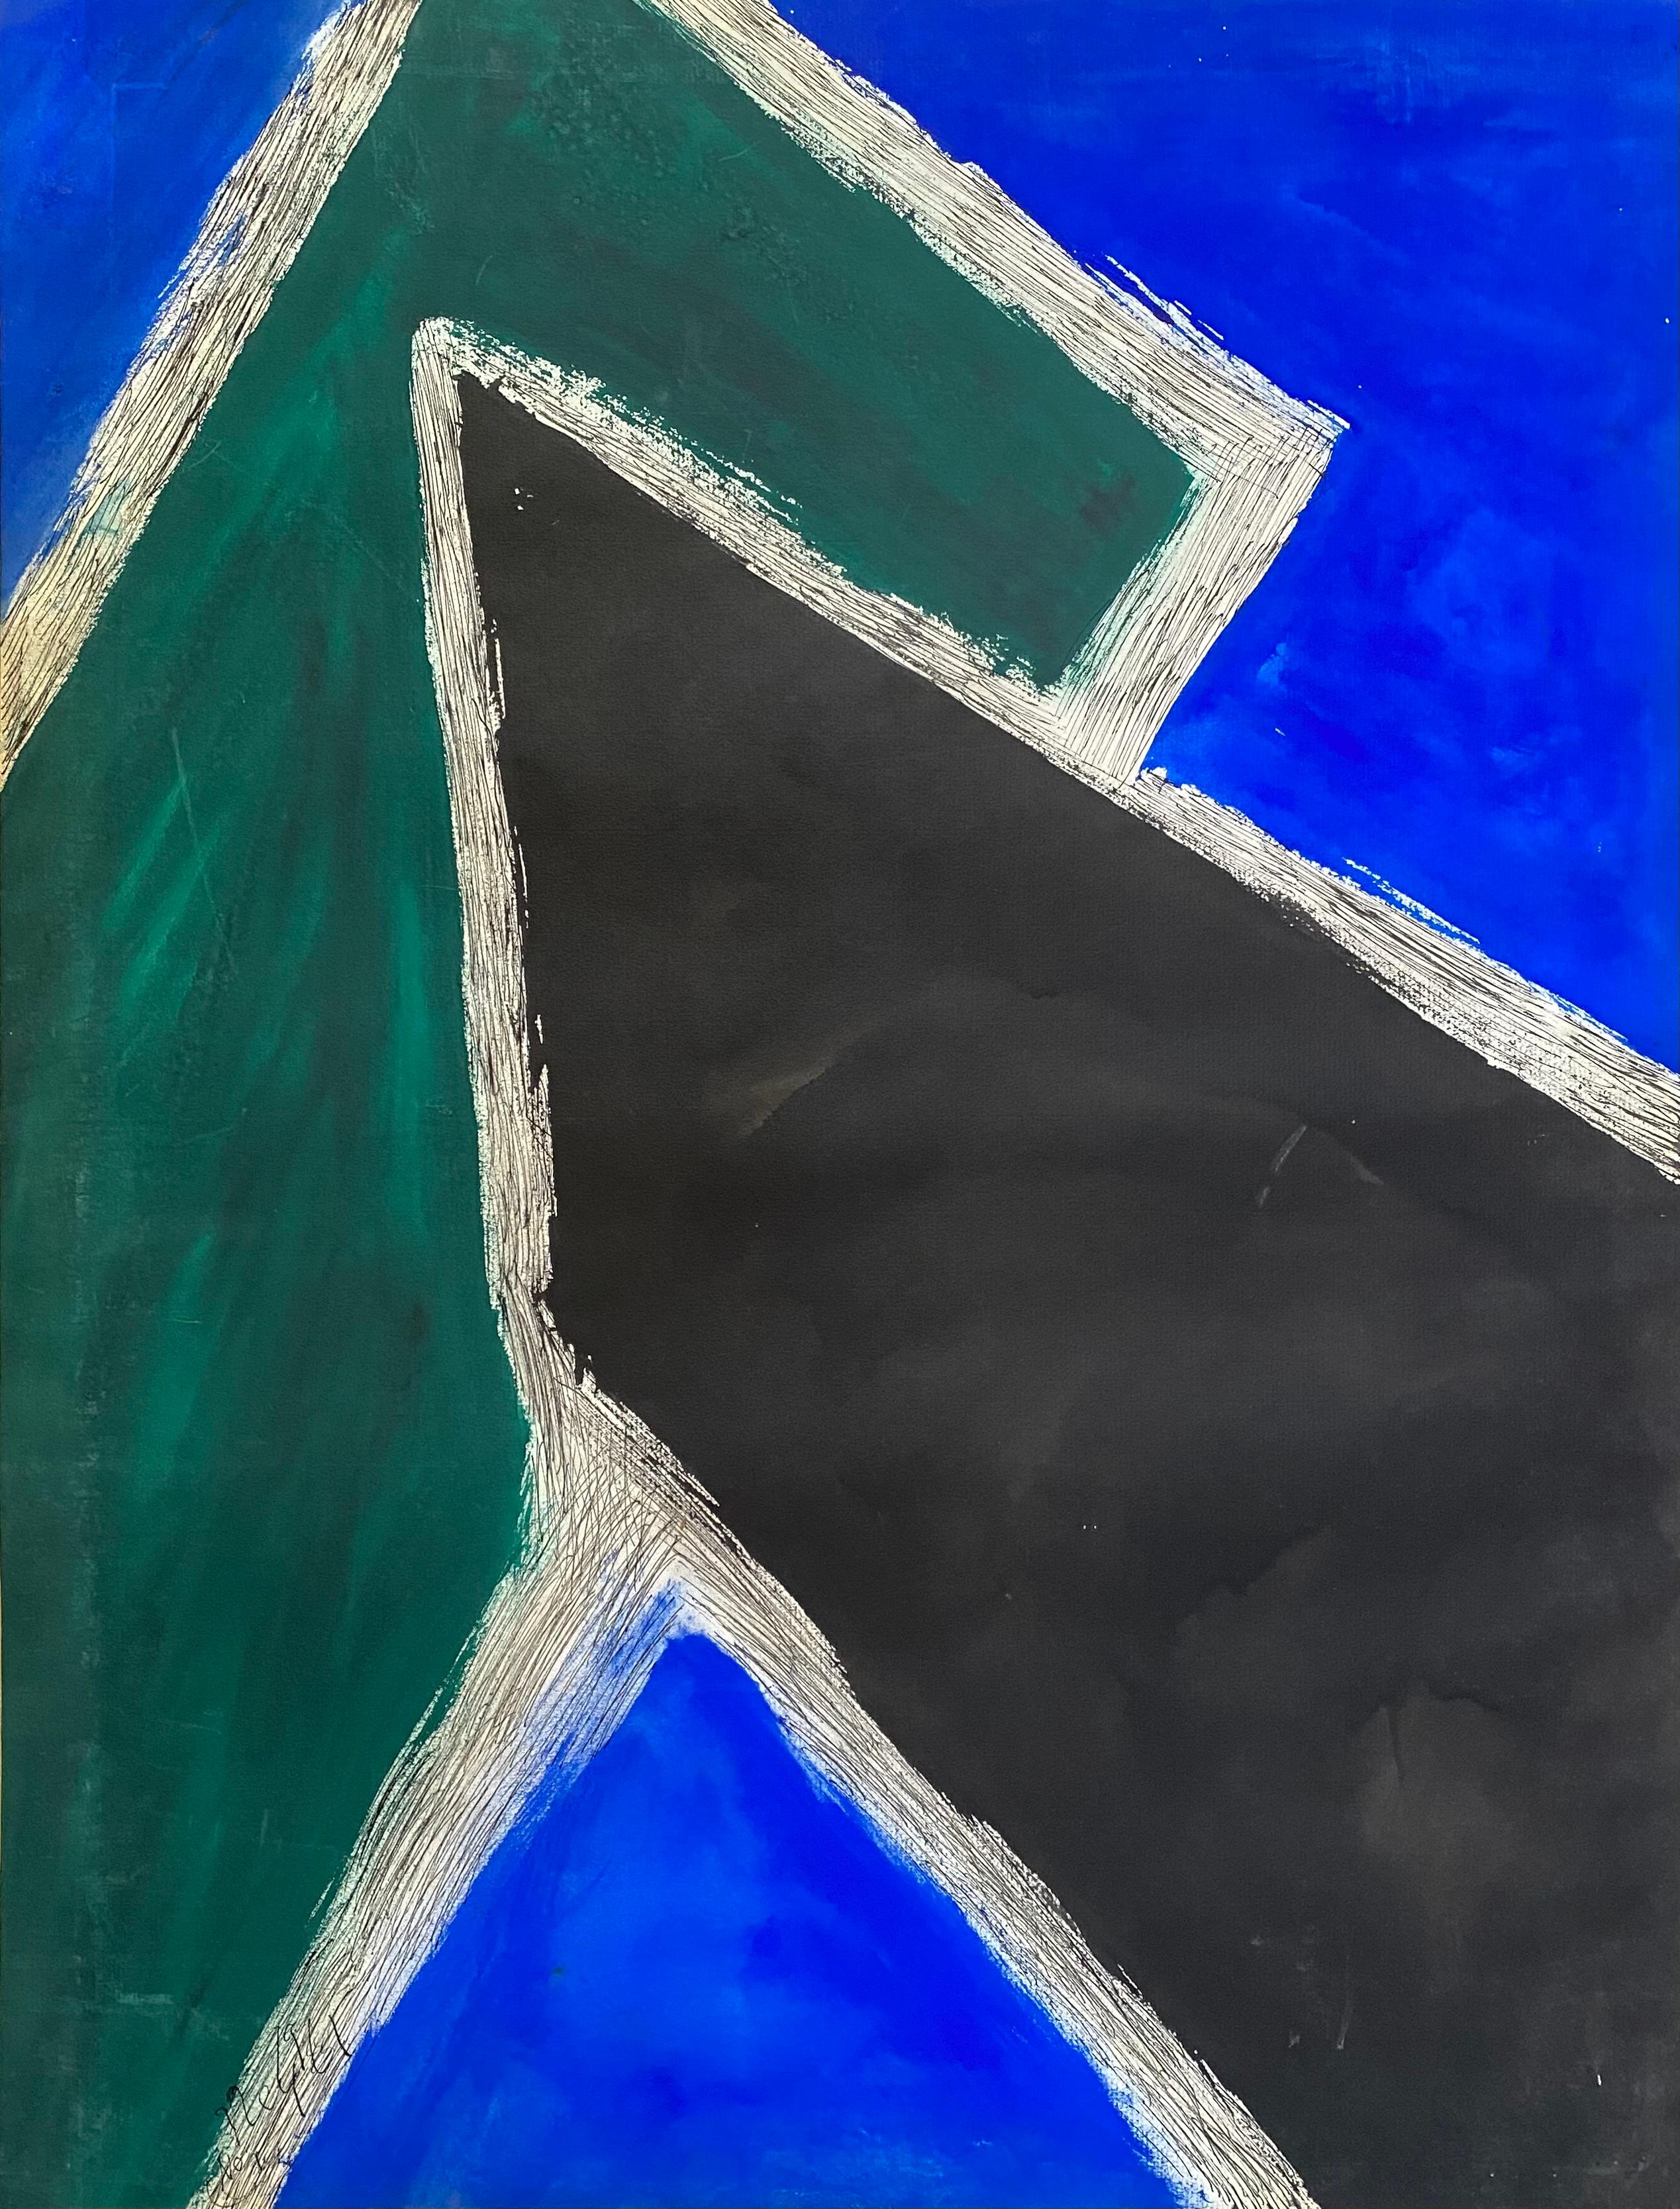 Lloyd Raymond Ney Abstract Drawing - “Abstract in Blue, Black and Green”